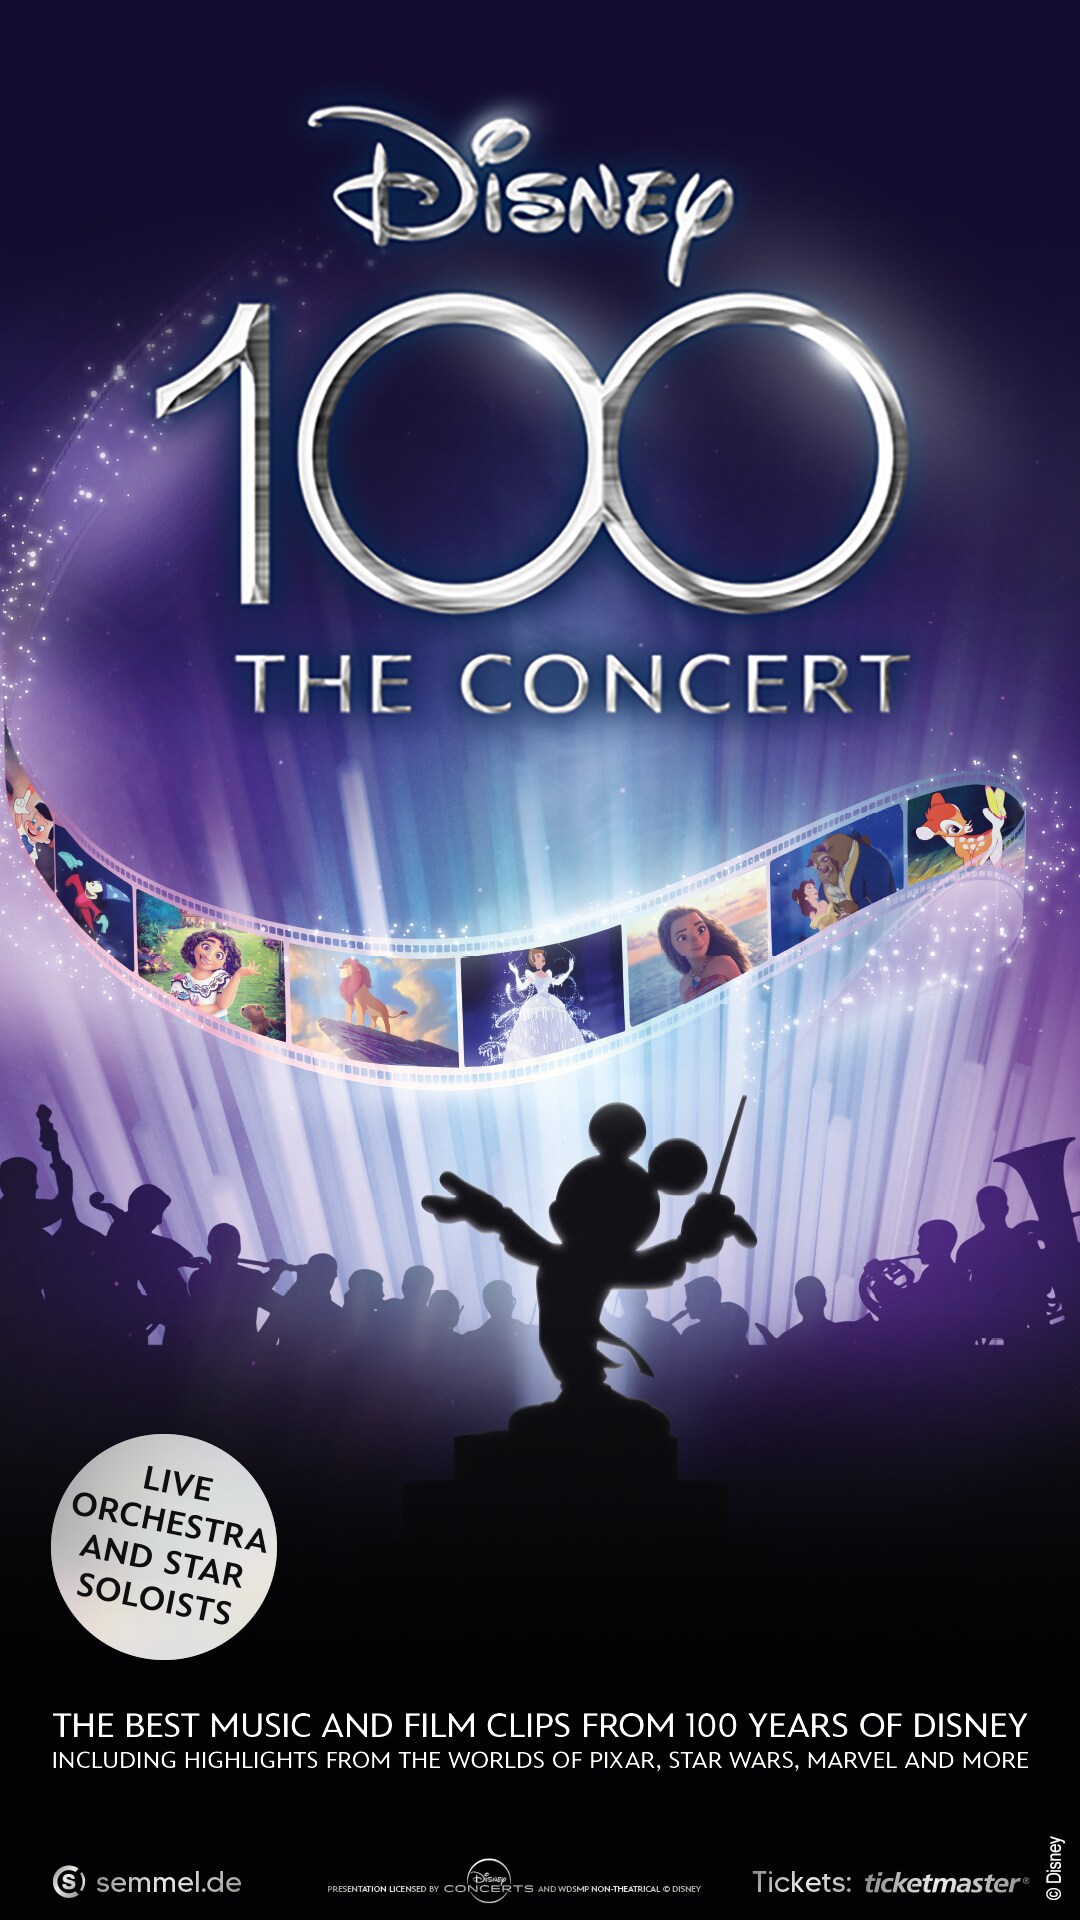 New Details About Disney 100 Years Of Wonder Revealed To, 60% OFF